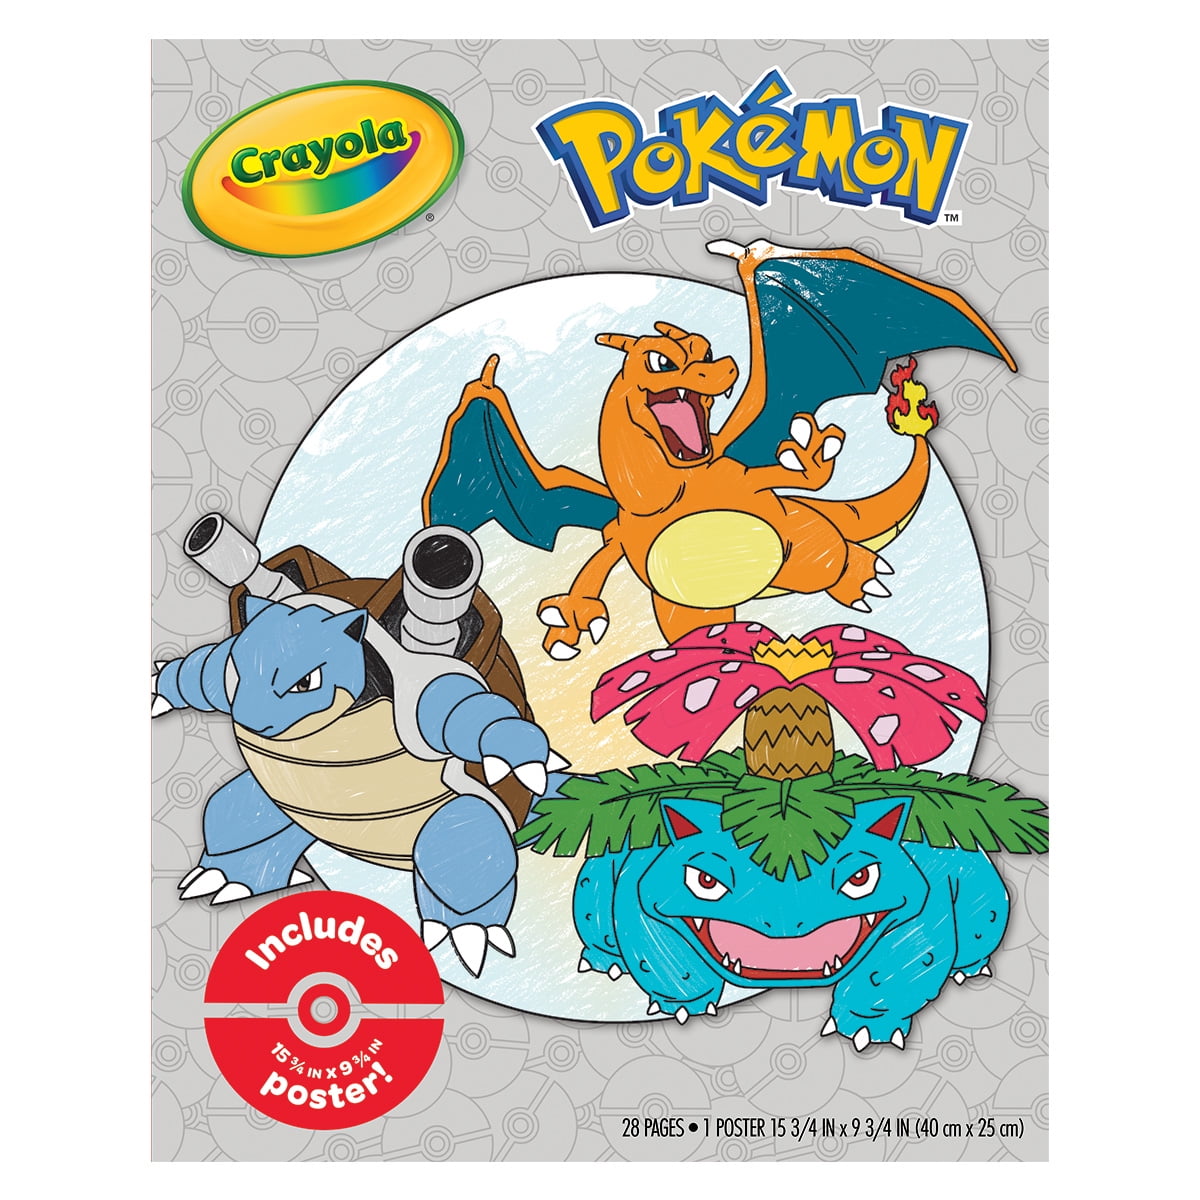 Crayola Pokémon Loose Leaf Coloring Pages, 28 Pages, Aged Up Coloring,  Gifts for Kids, Ages 8+